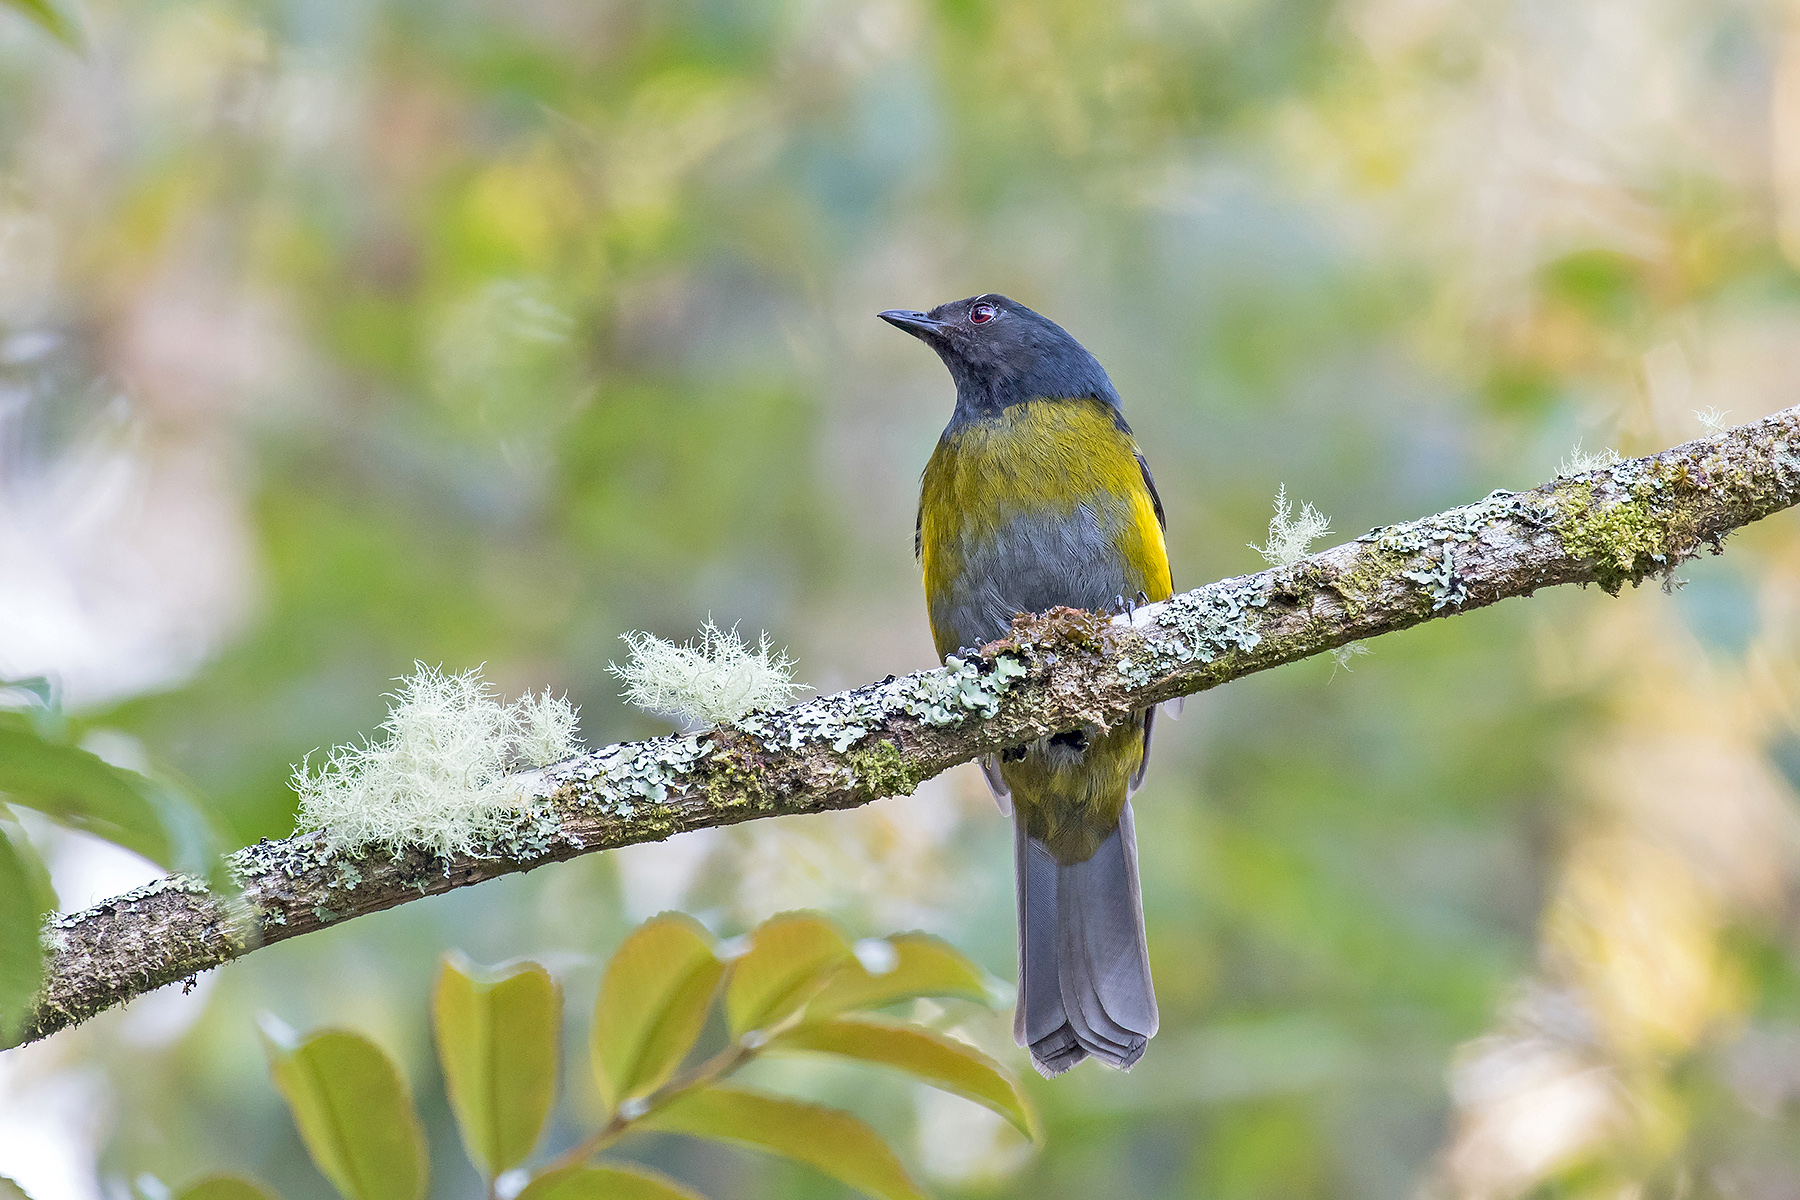 Black-and-yellow Phainoptila in Costa Rica (image by Pete Morris)